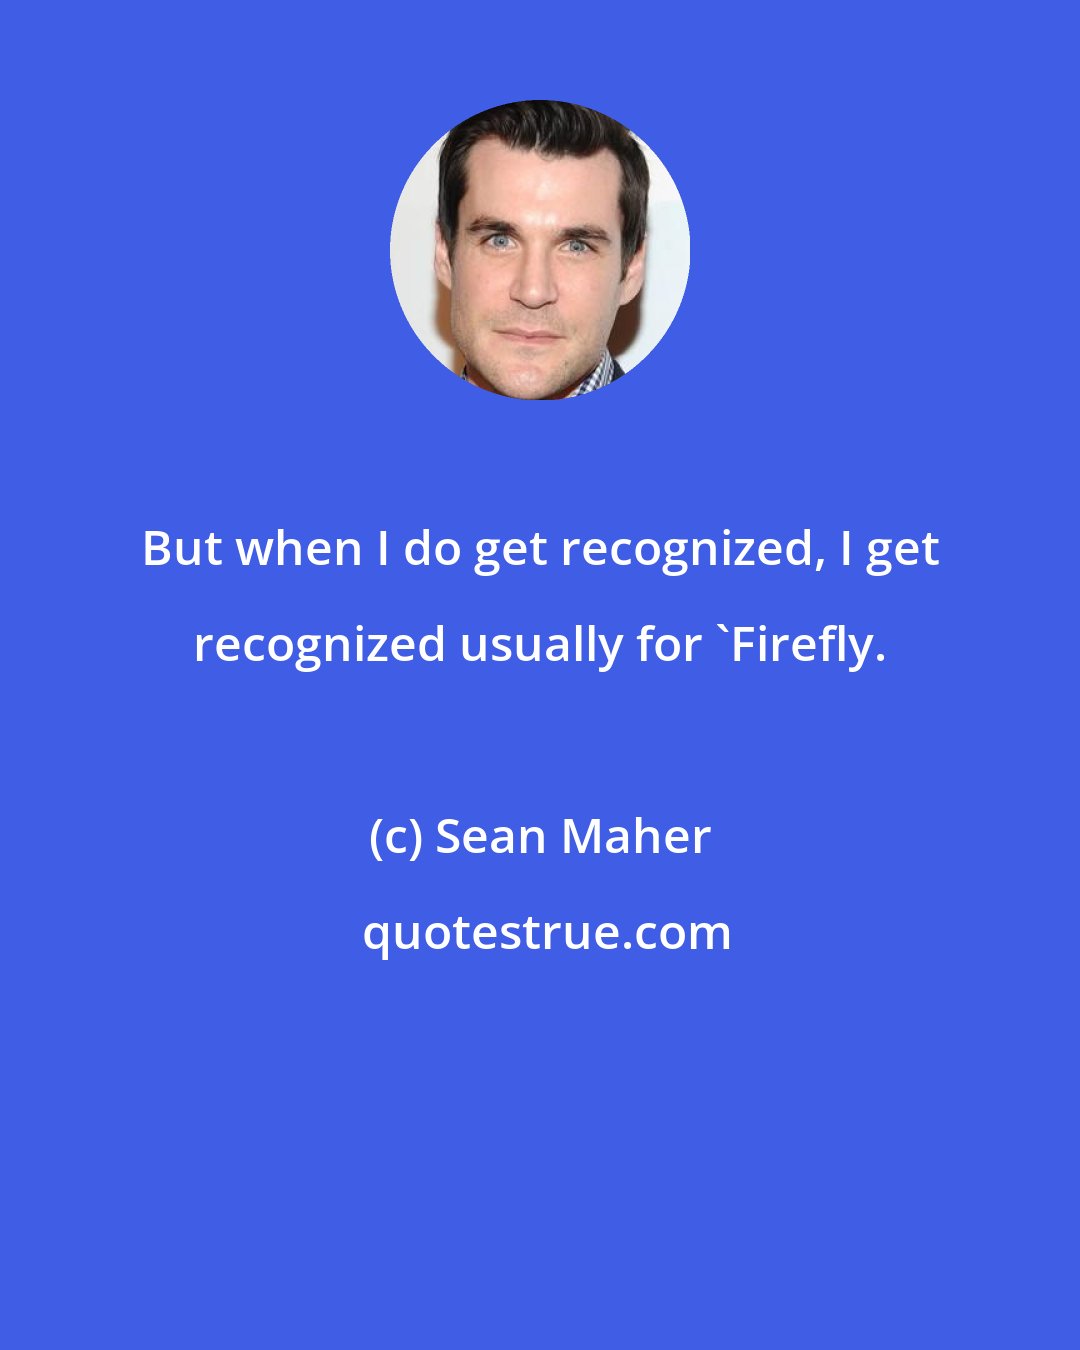 Sean Maher: But when I do get recognized, I get recognized usually for 'Firefly.